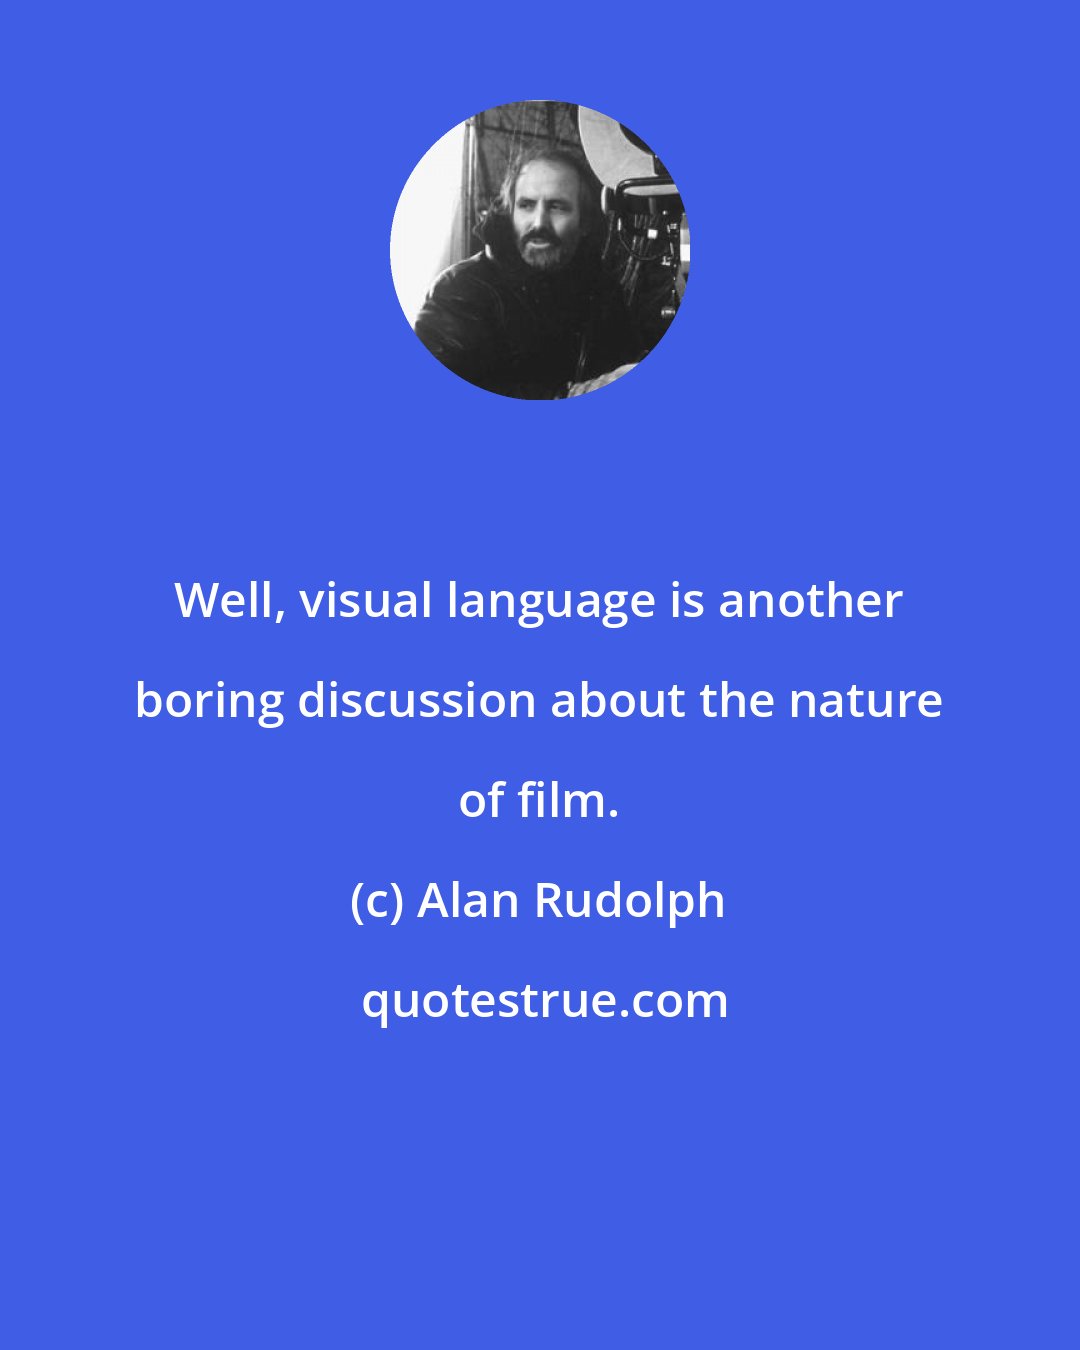 Alan Rudolph: Well, visual language is another boring discussion about the nature of film.